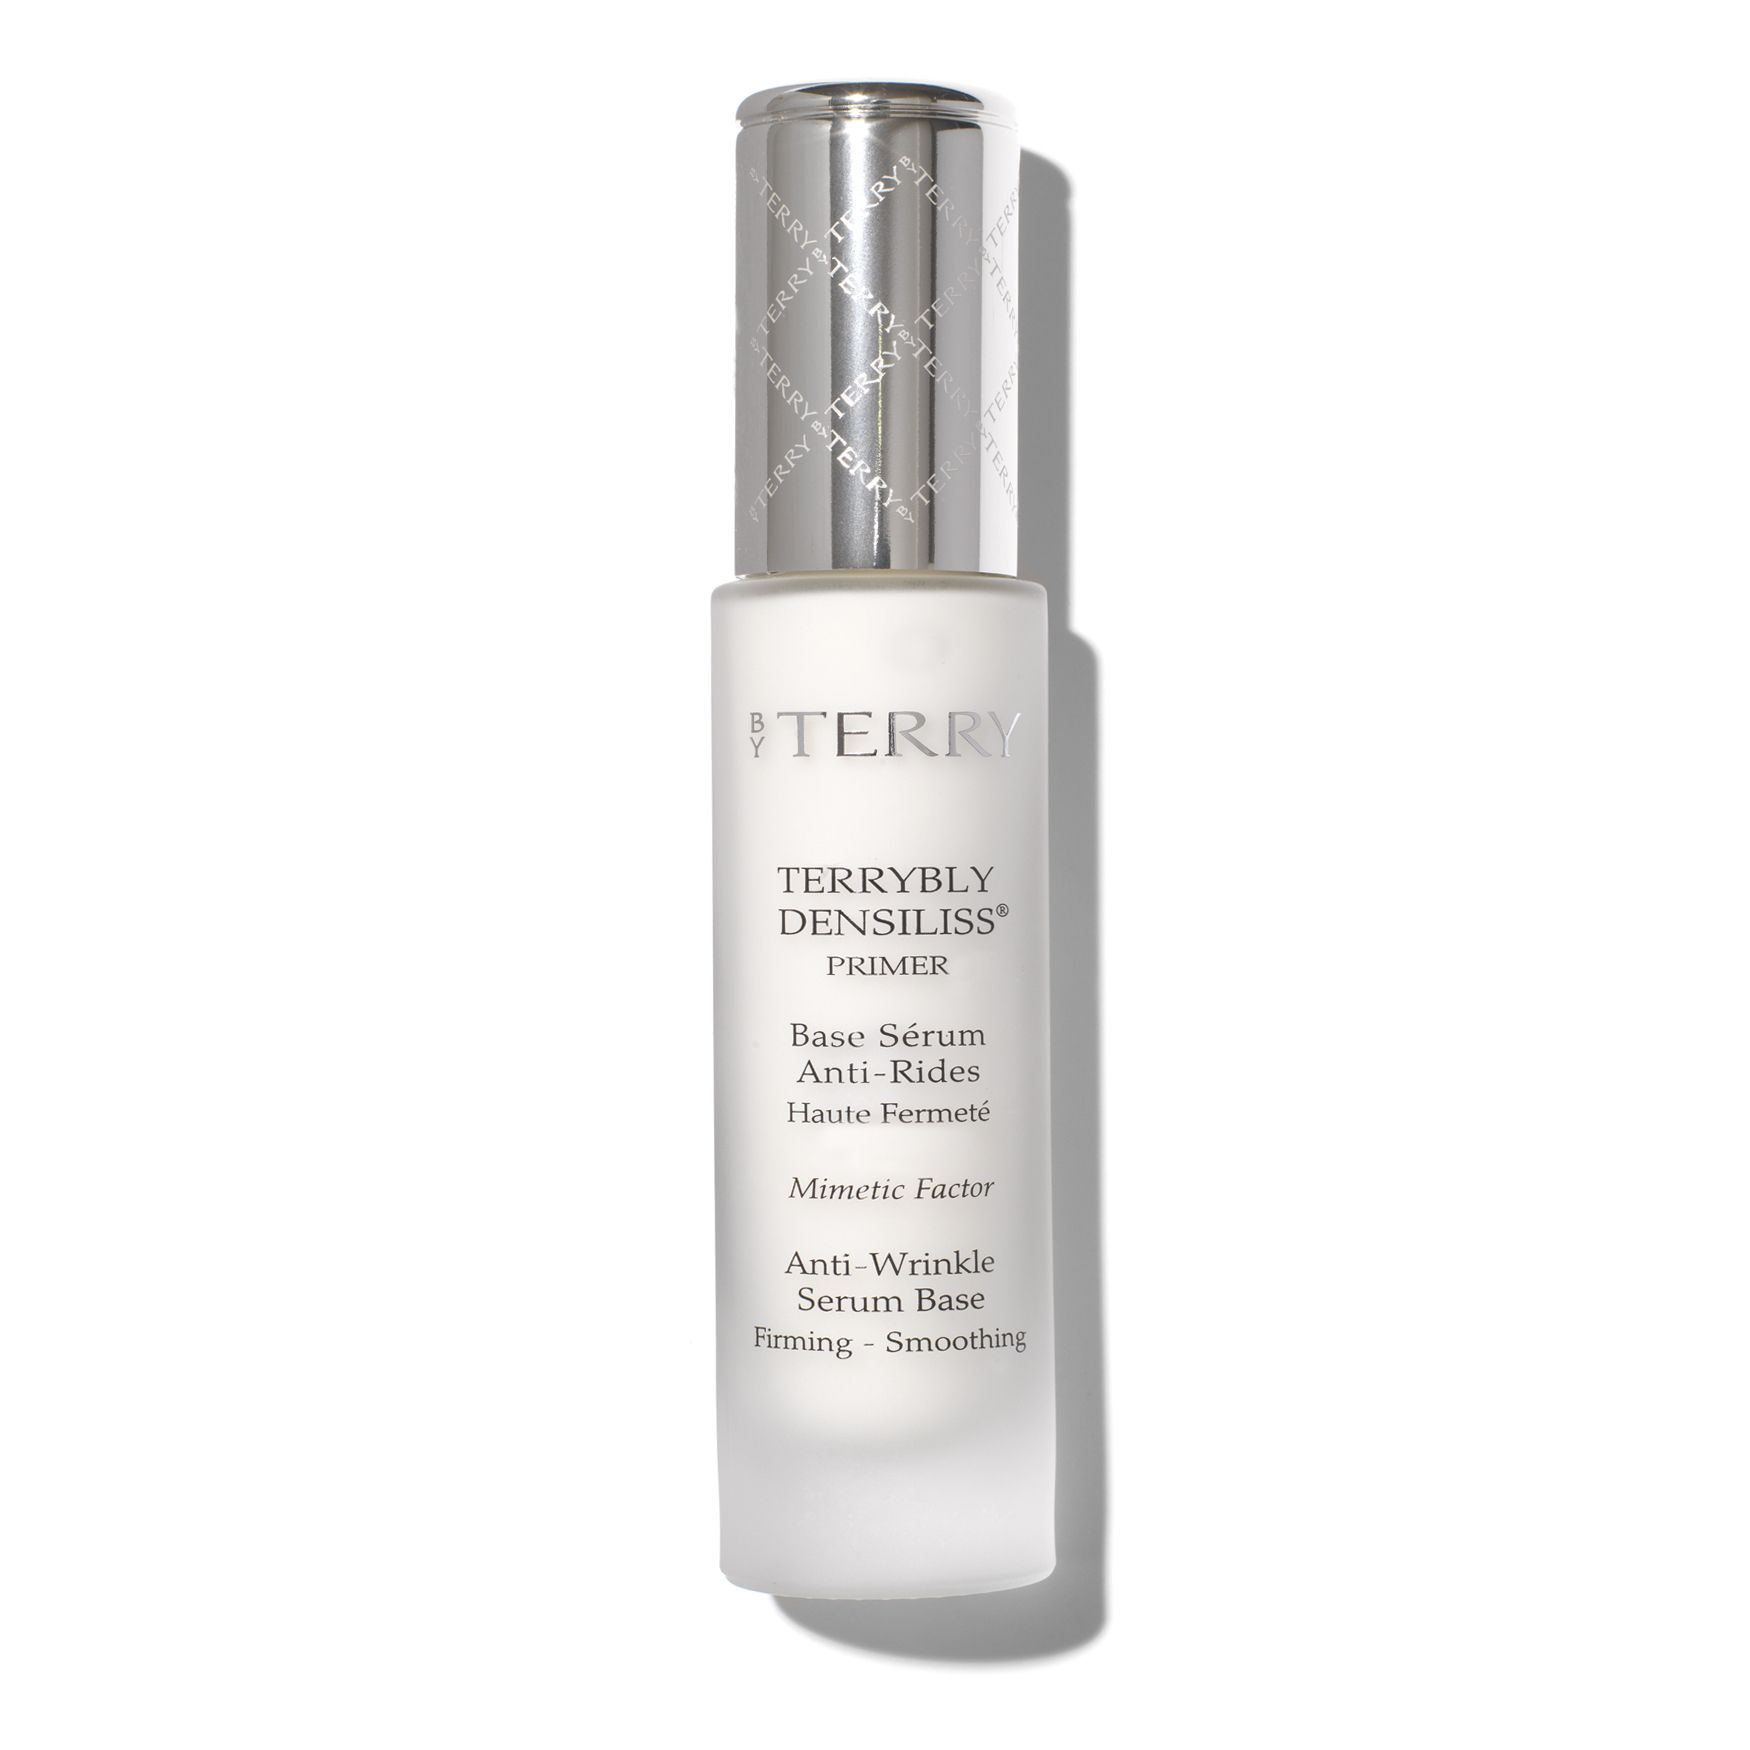 BY TERRY Terrybly Densiliss Primer | Space NK (US)